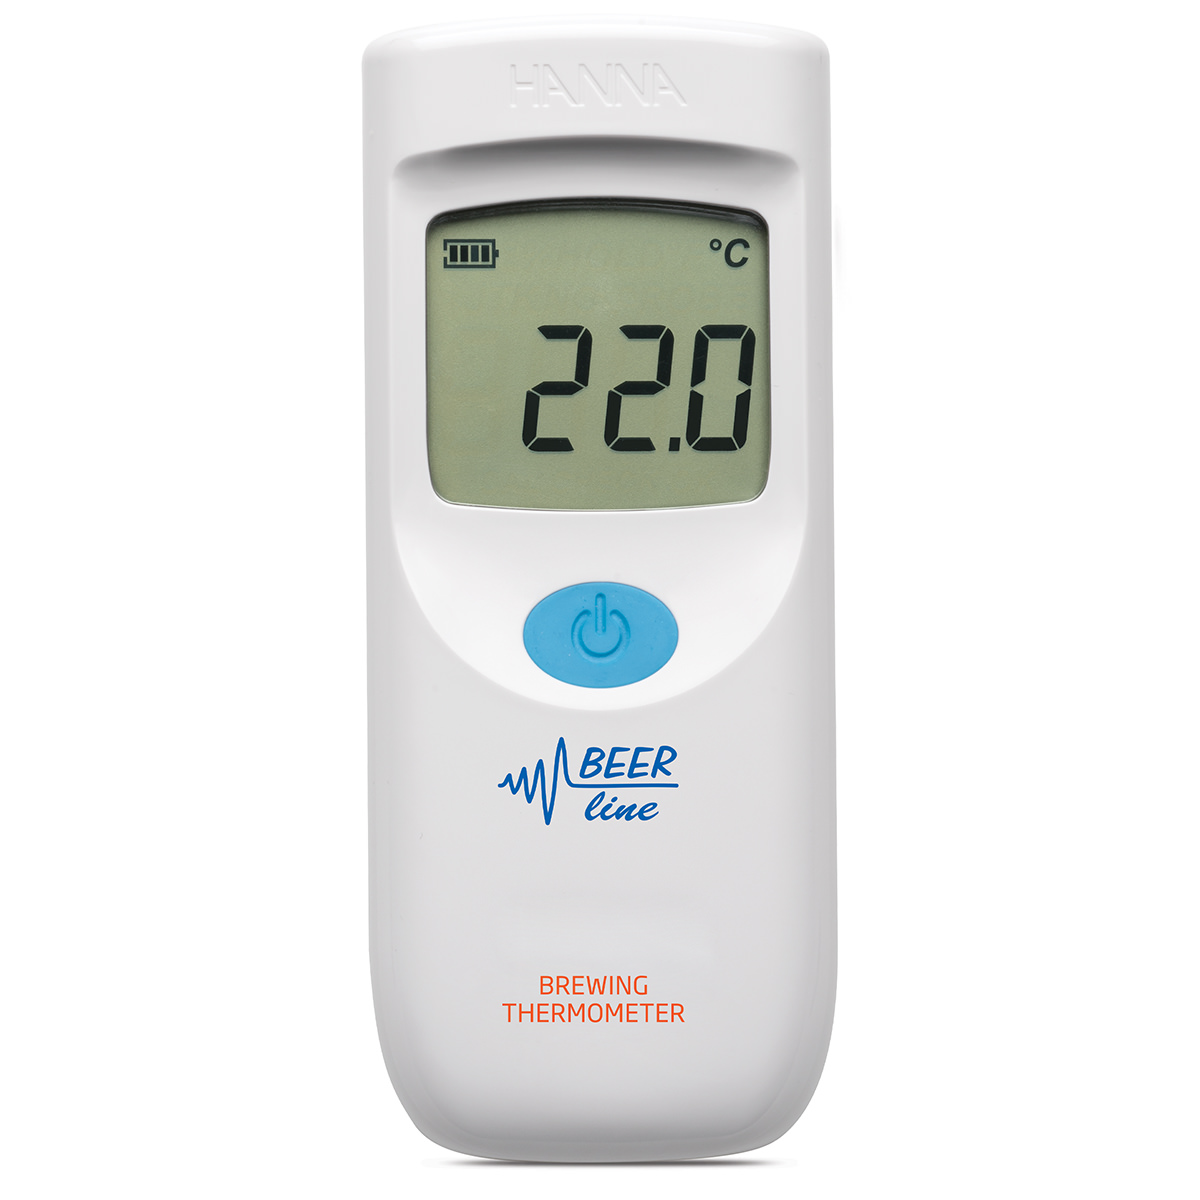 HI935012 portable beer thermometer